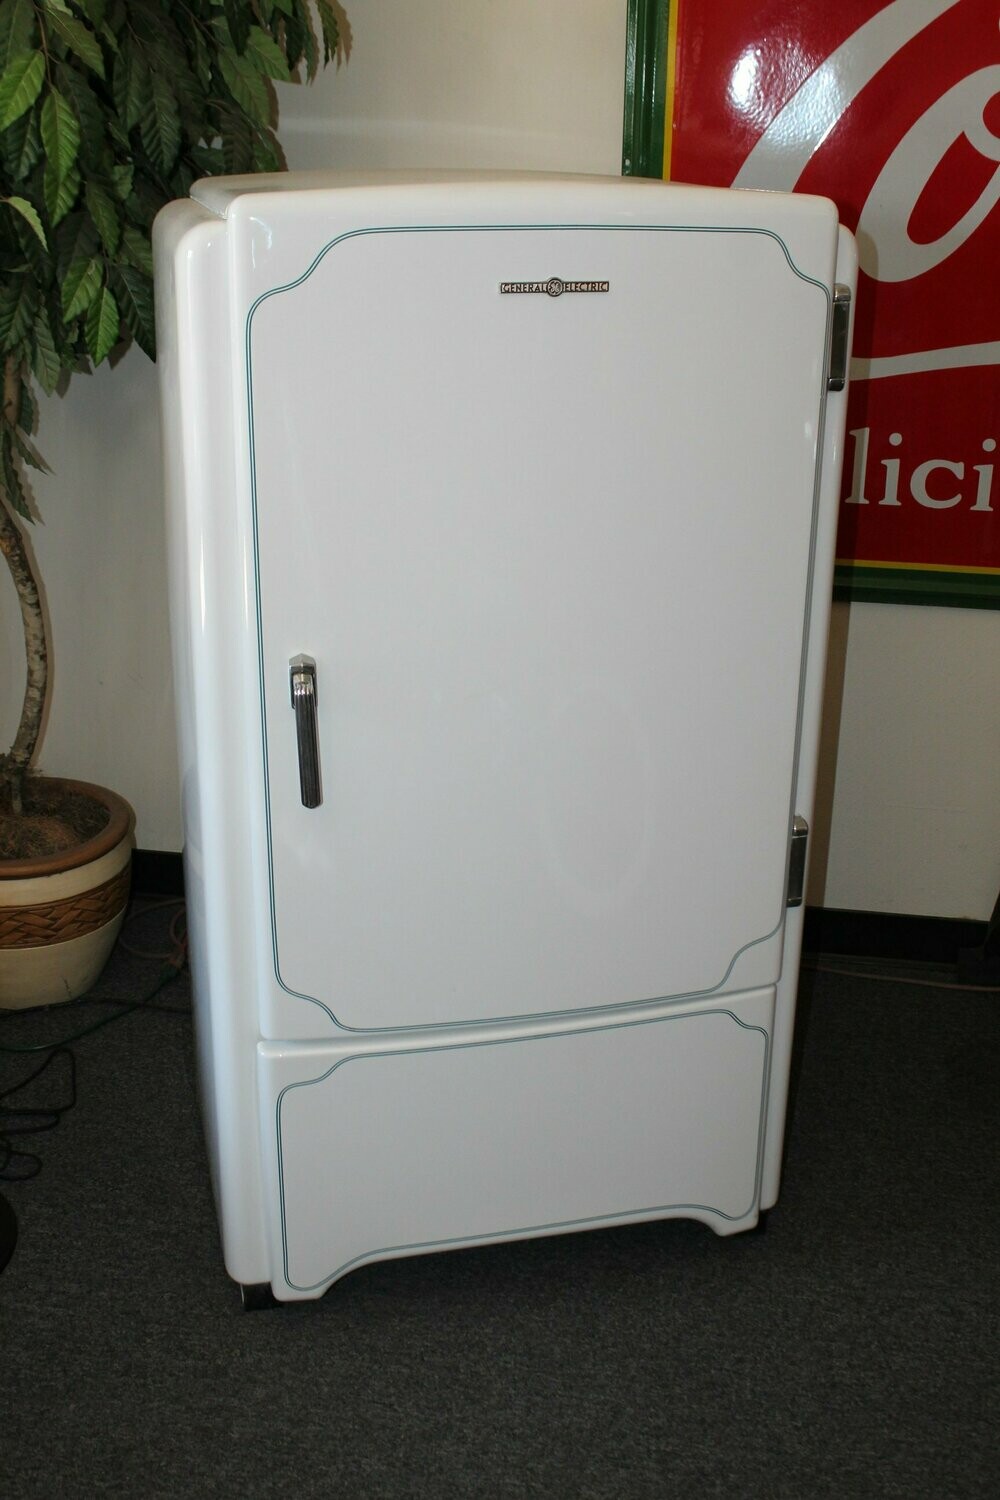 1950s General Electric Refrigerator